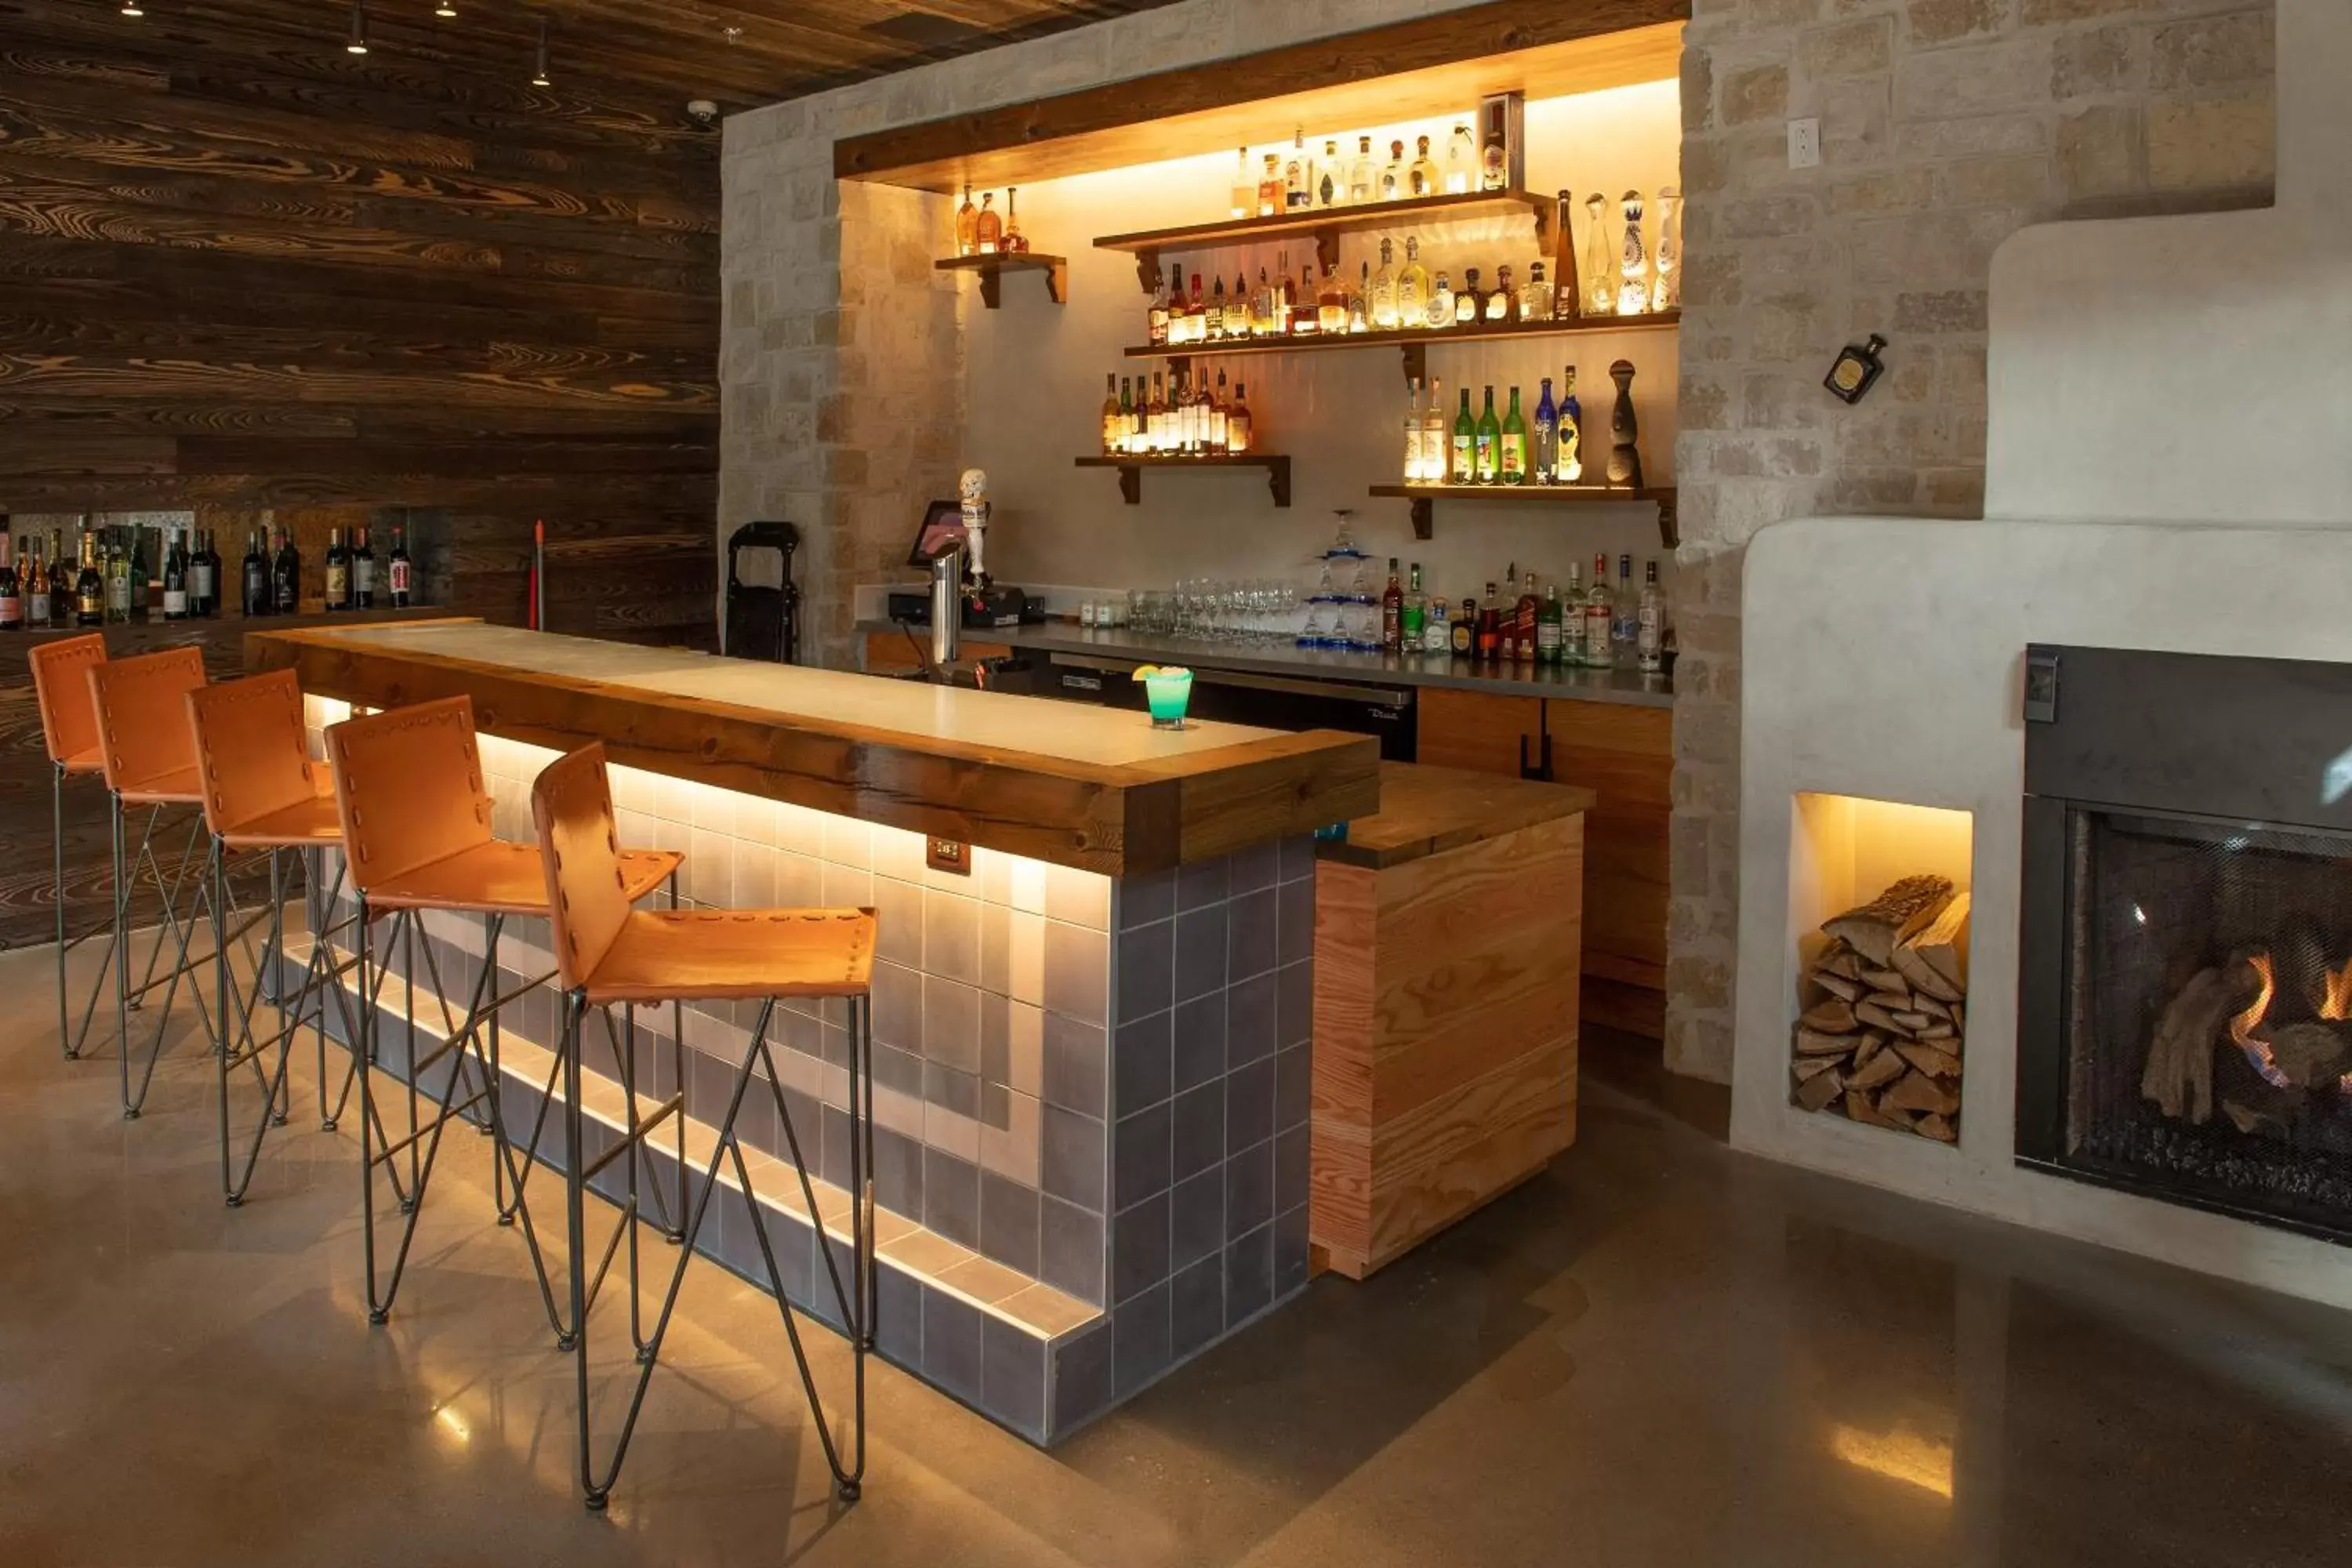 Lounge/Bar in Texican Court, by Valencia Hotel Group